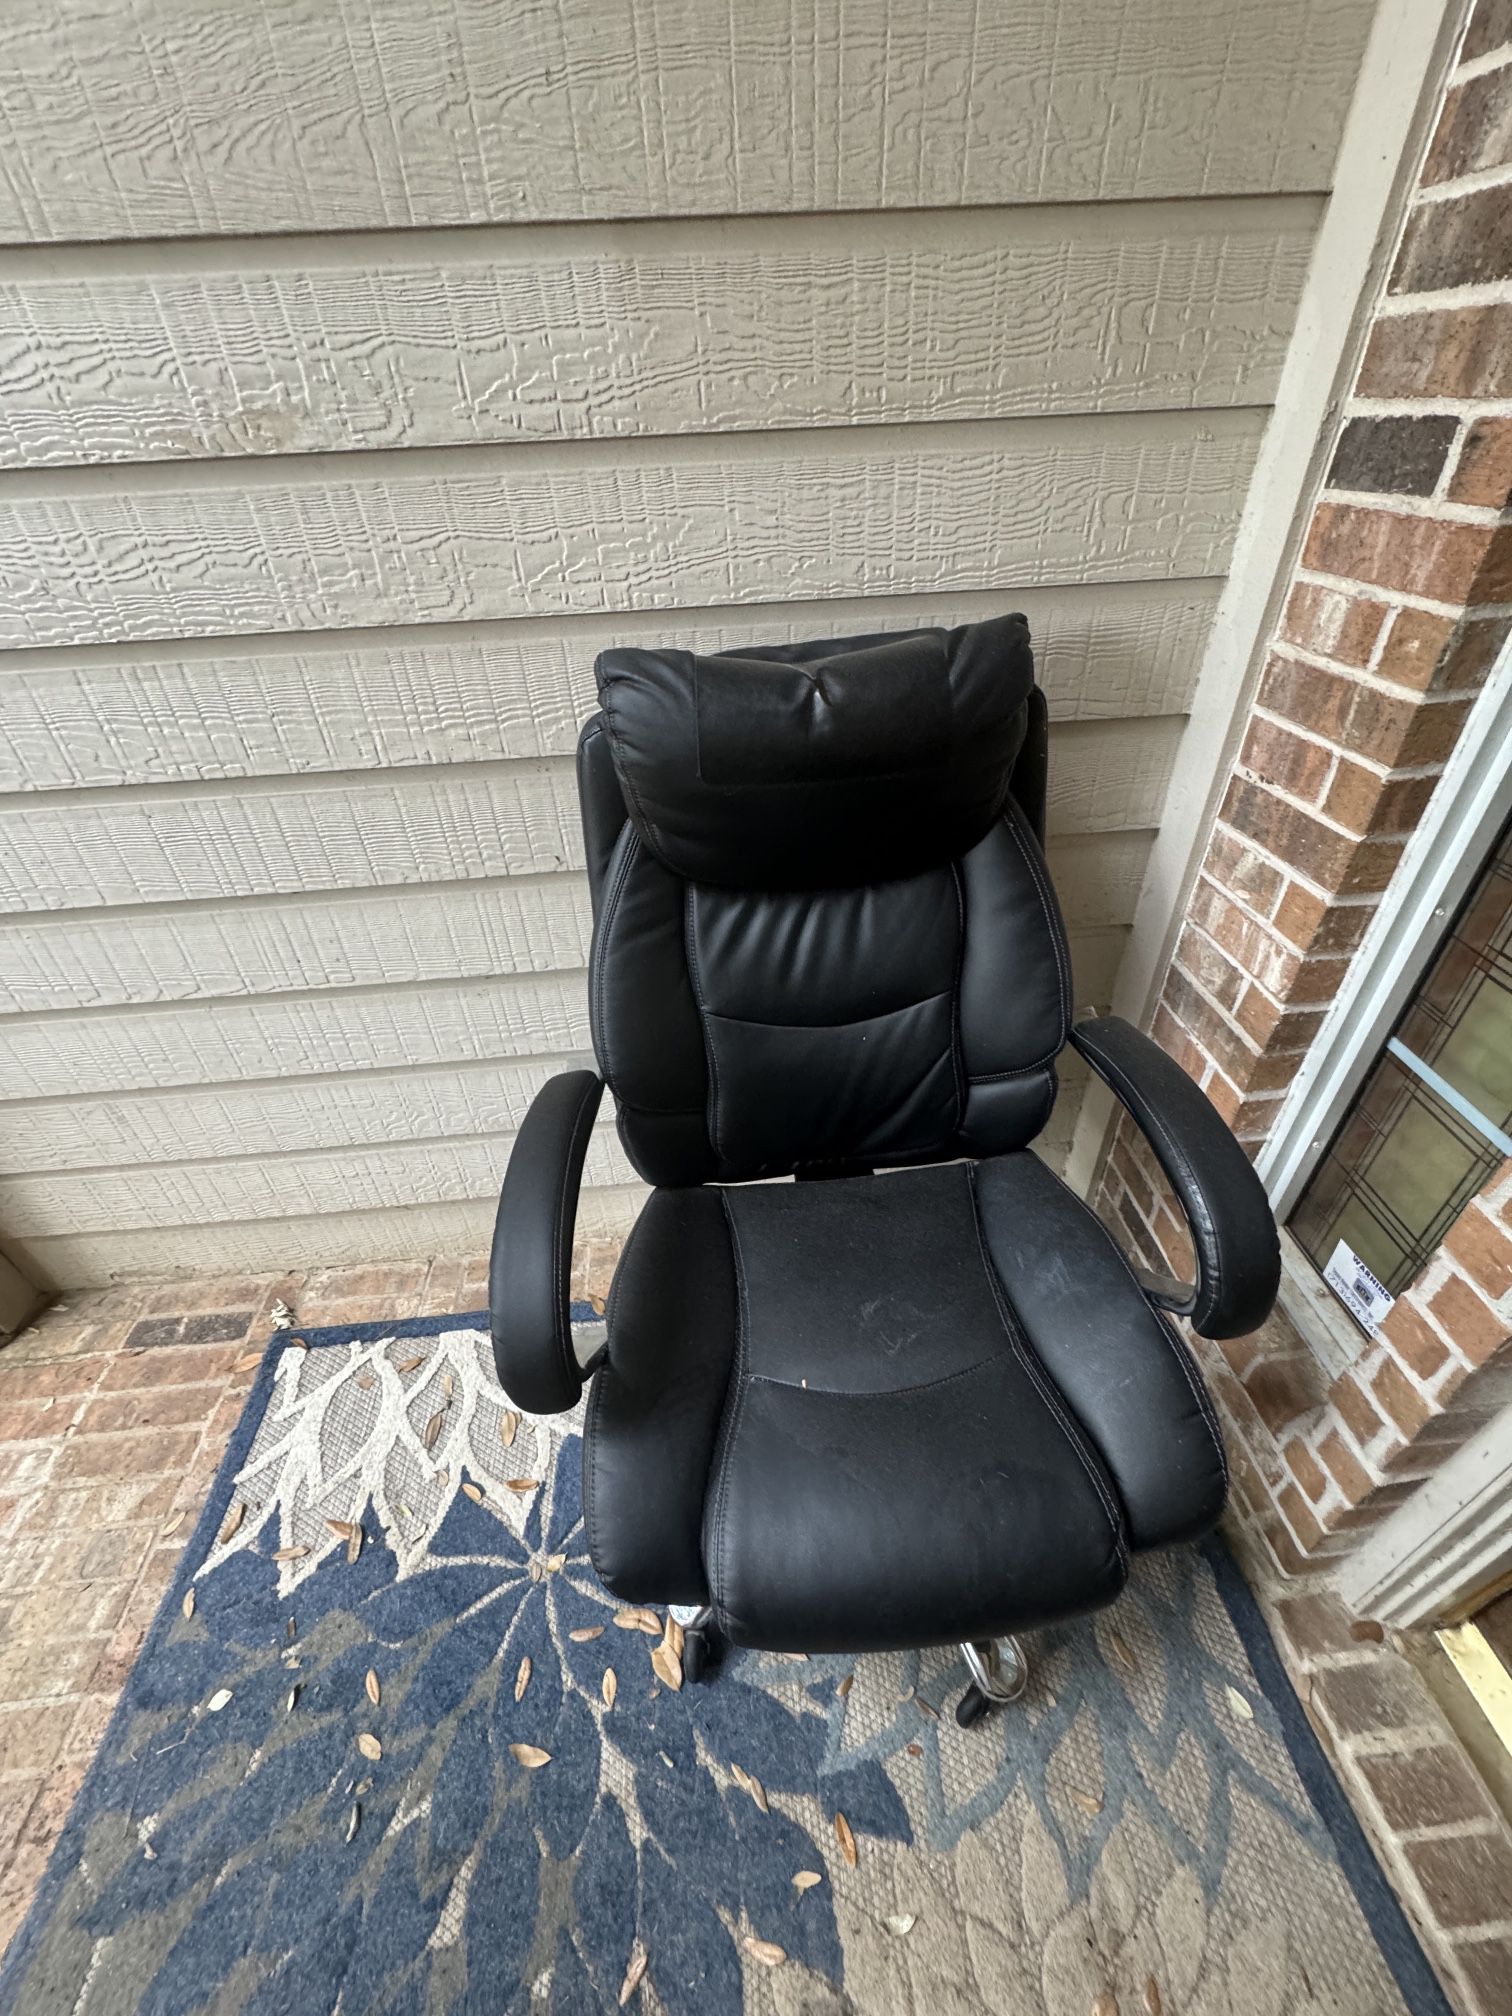 Big Office Chair